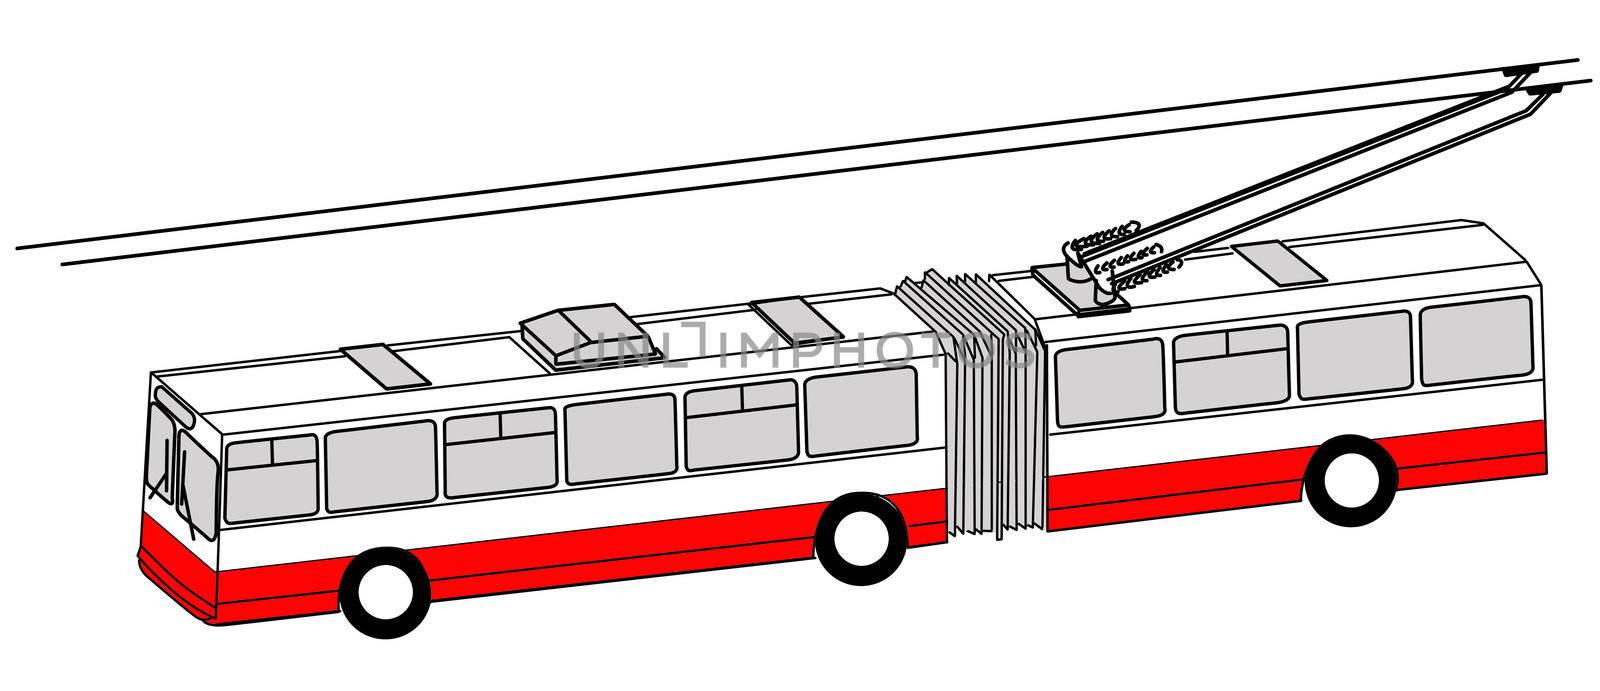 trolley bus silhouette on white background, vector illustration by basel101658